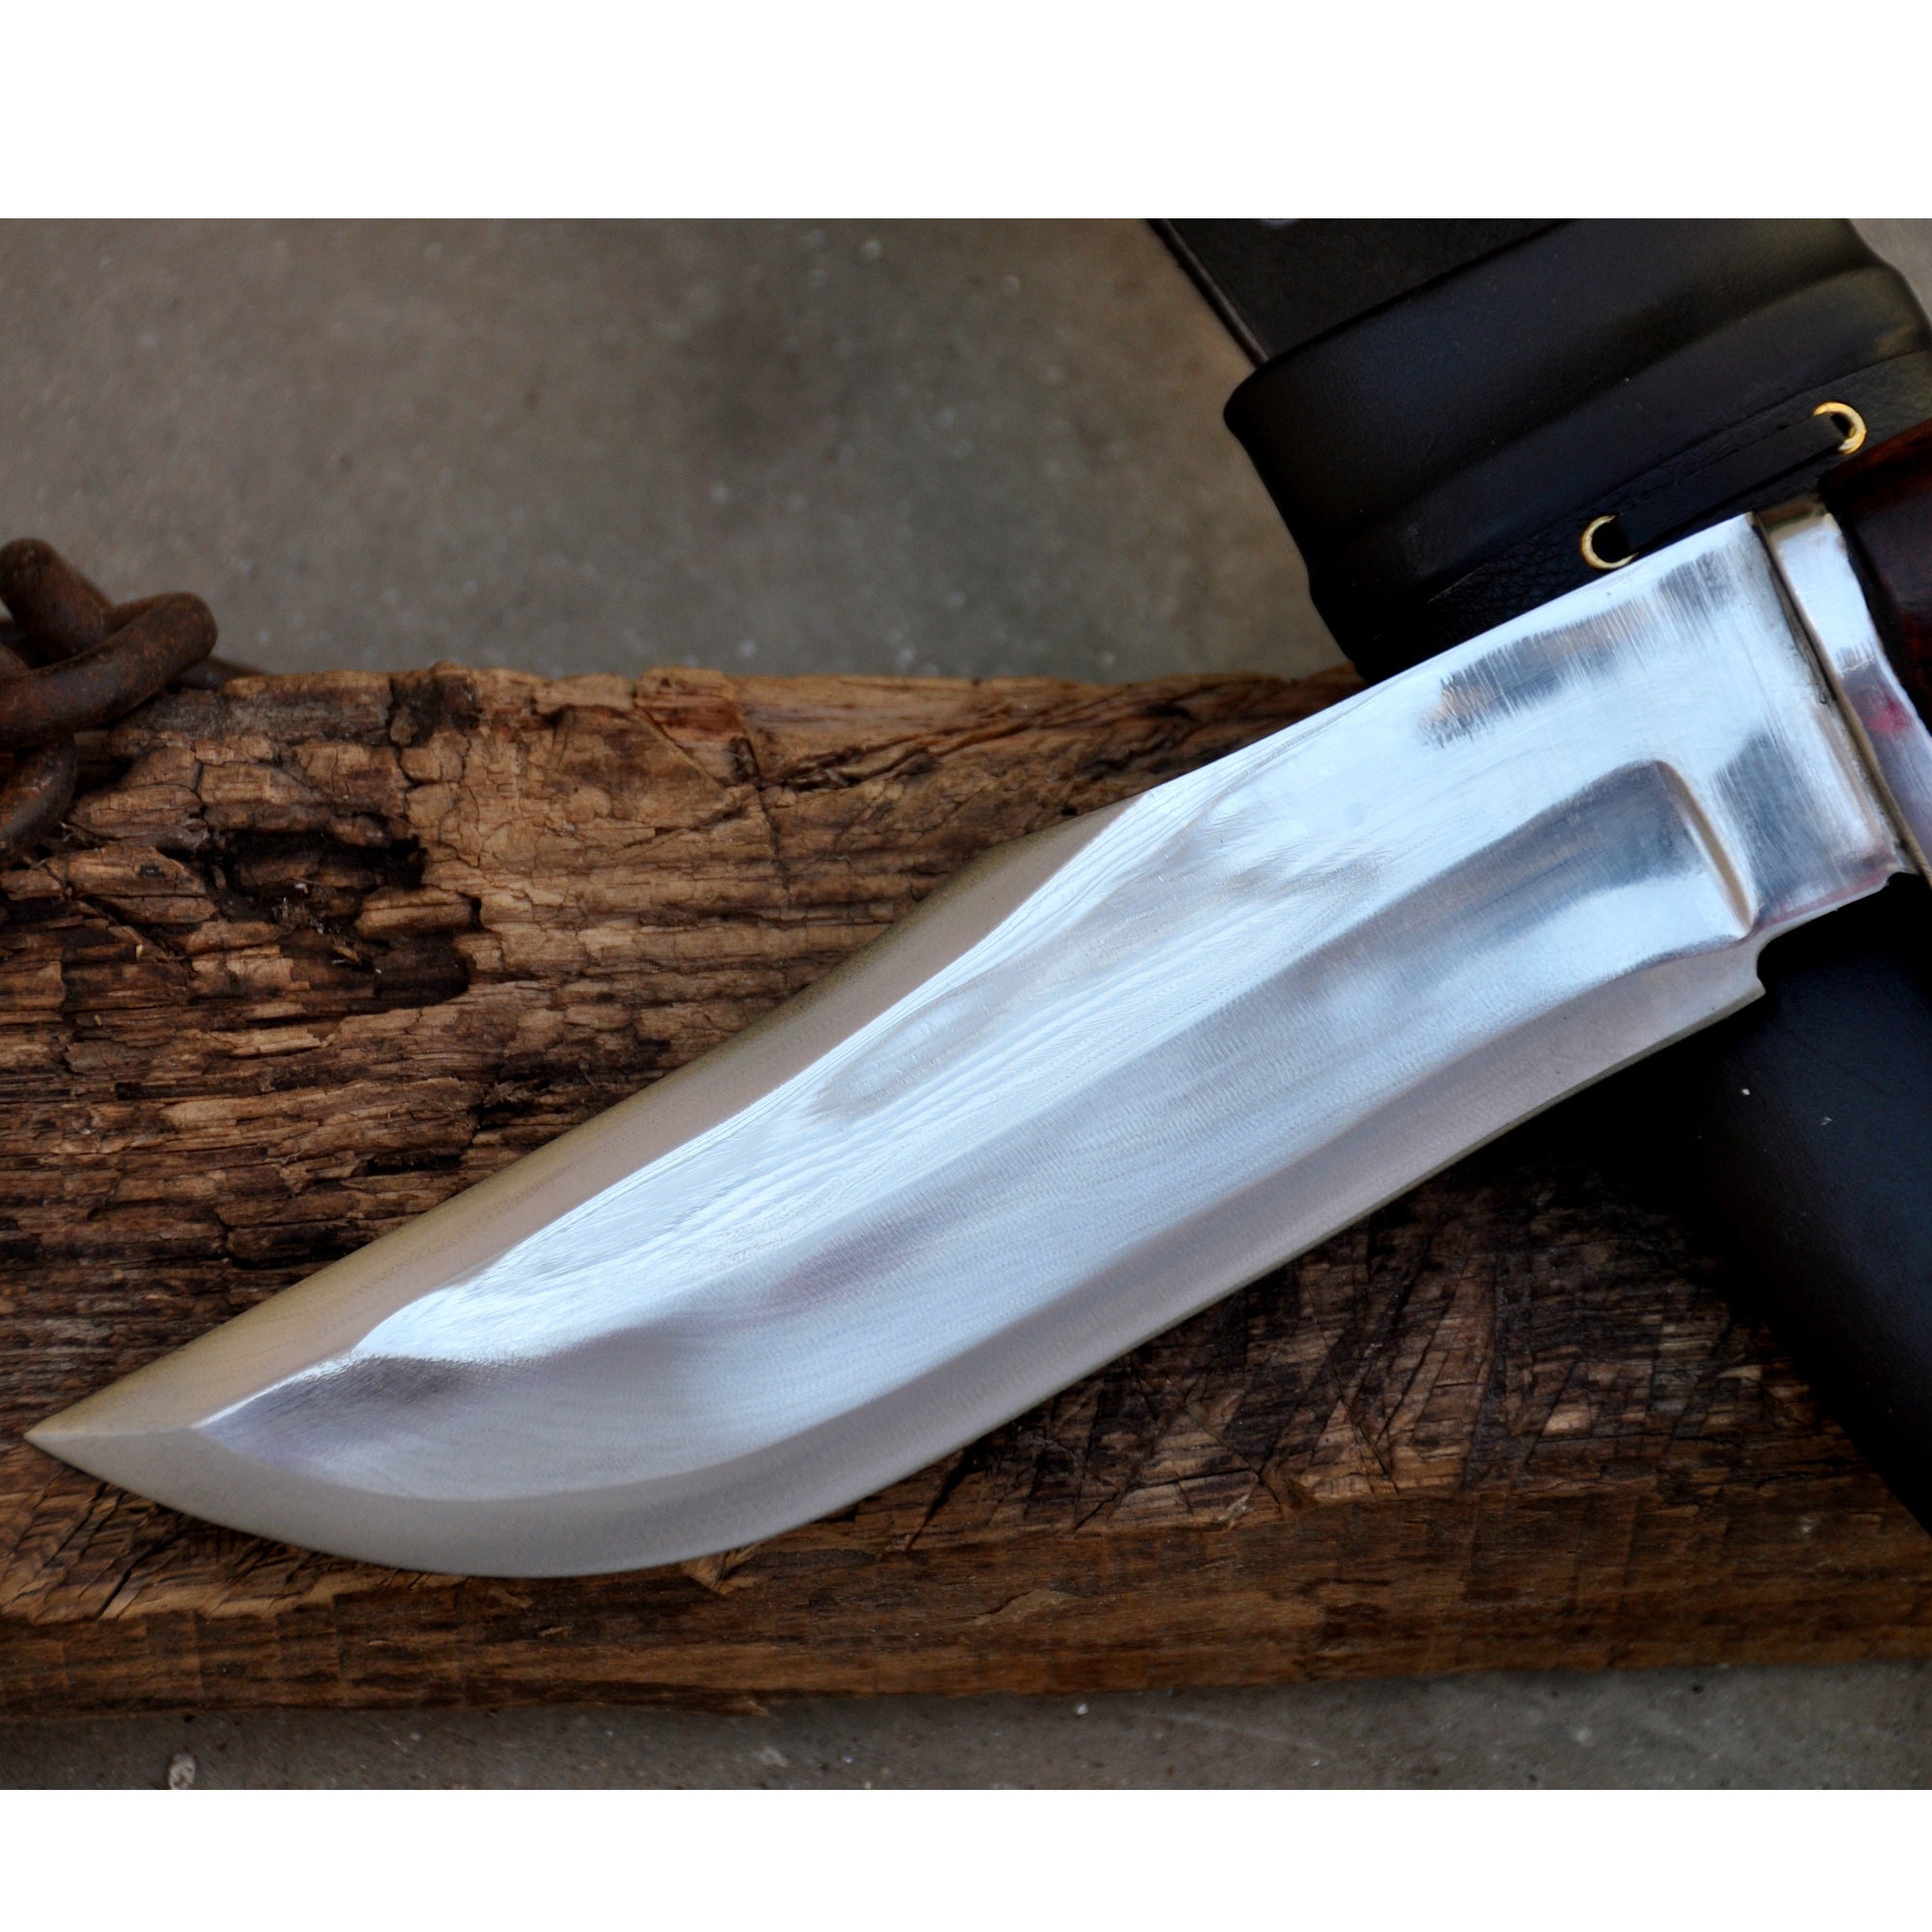 Everestforge-6 inches Blade Mukti cleaver-Hand forged cleaver knife-Bowie-Full tang-Leaf spring of truck Tempered-Sharpen-Ready to use